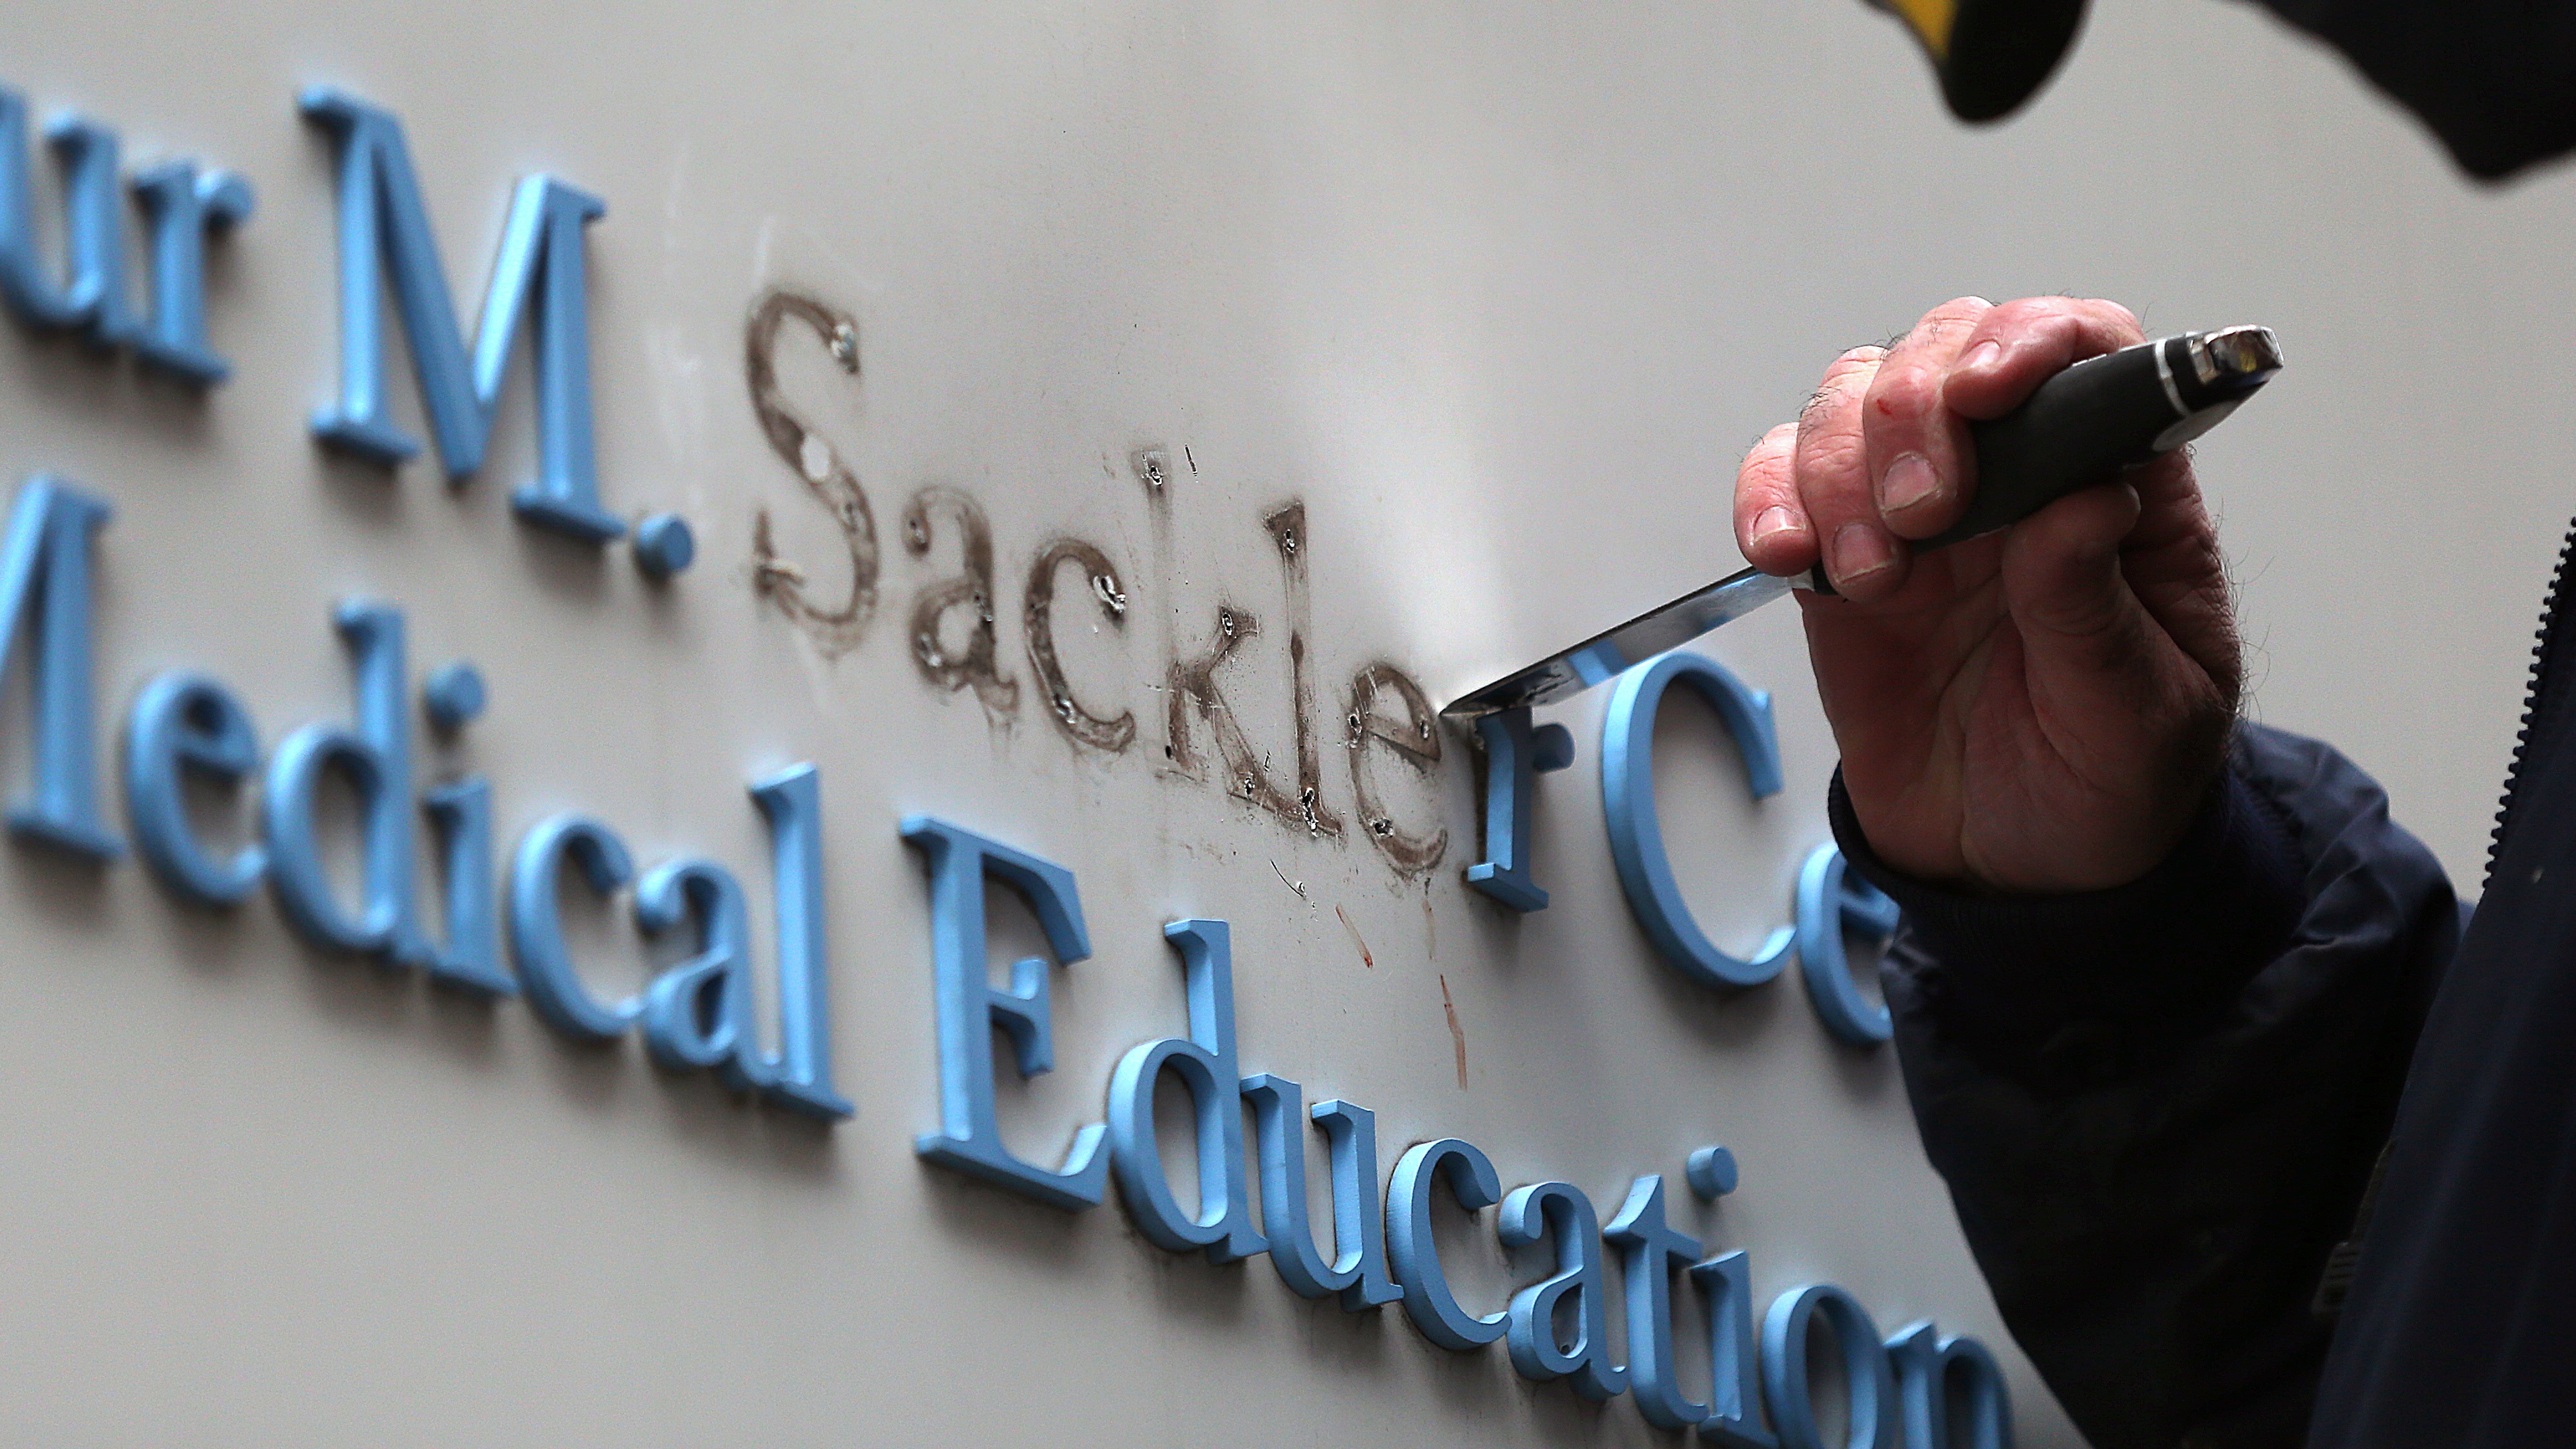 Sackler family name is removed from building at Tufts University